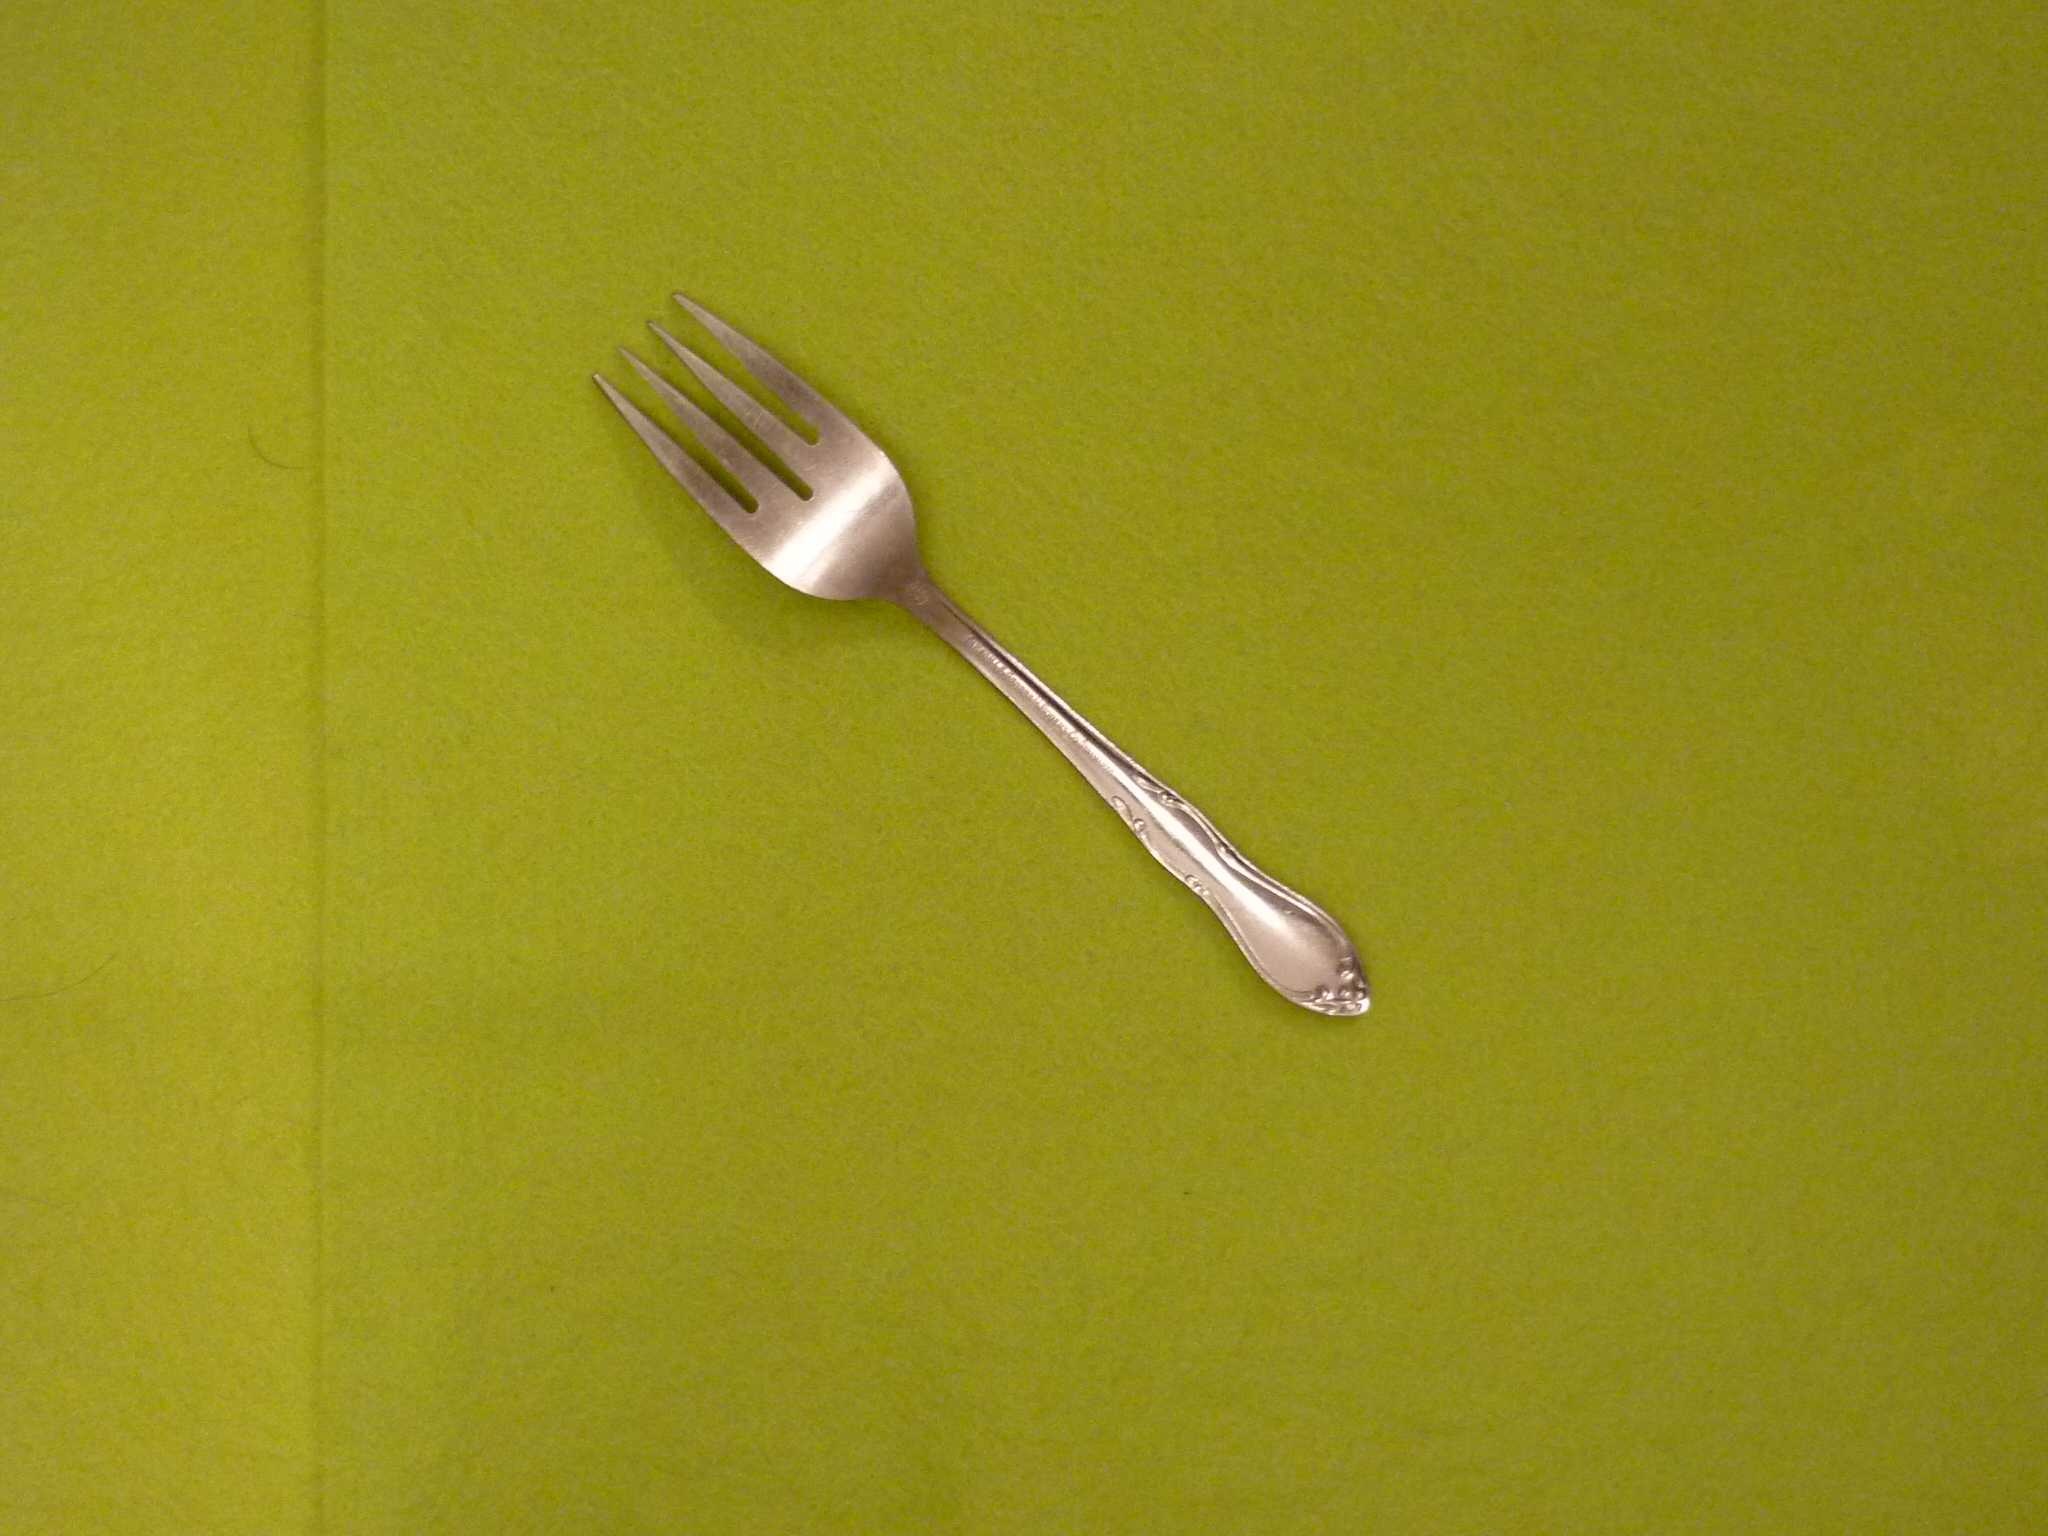 Dinner fork image classifcation dataset for machine learning